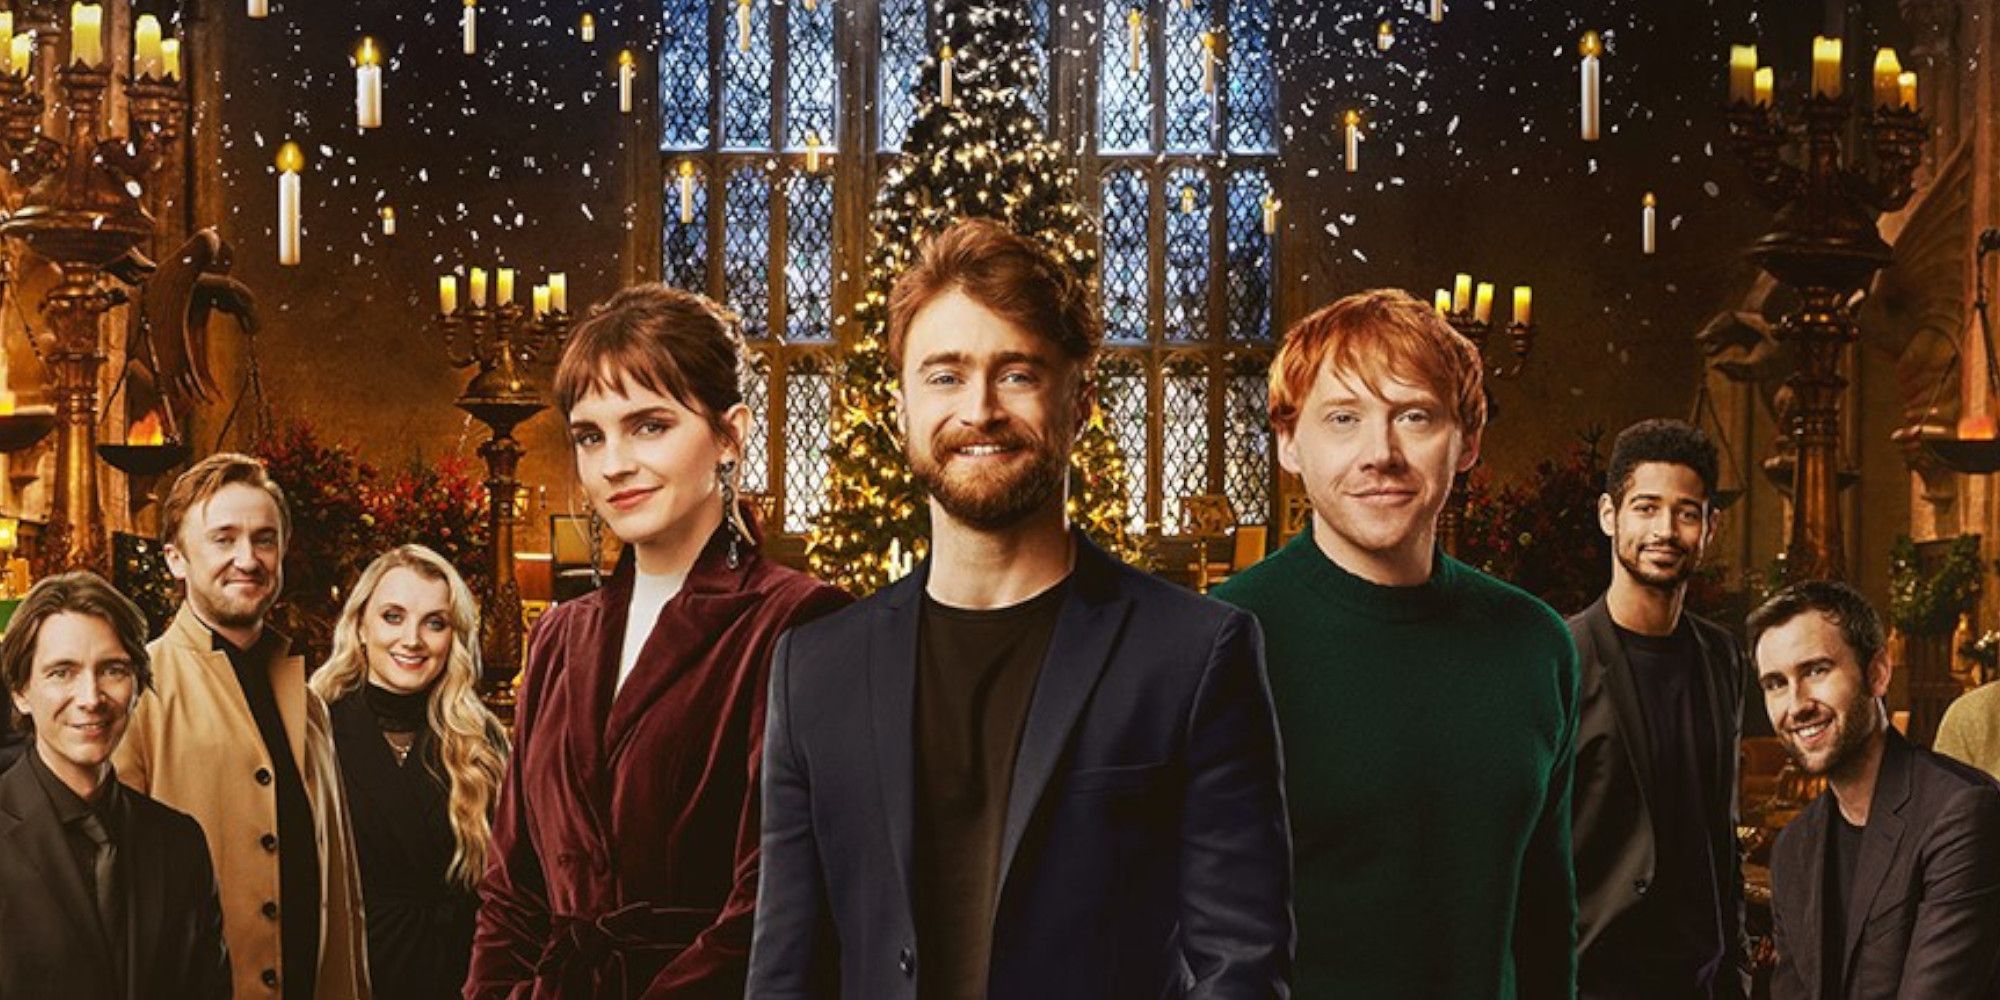 The Harry Potter cast in Return To Hogwarts